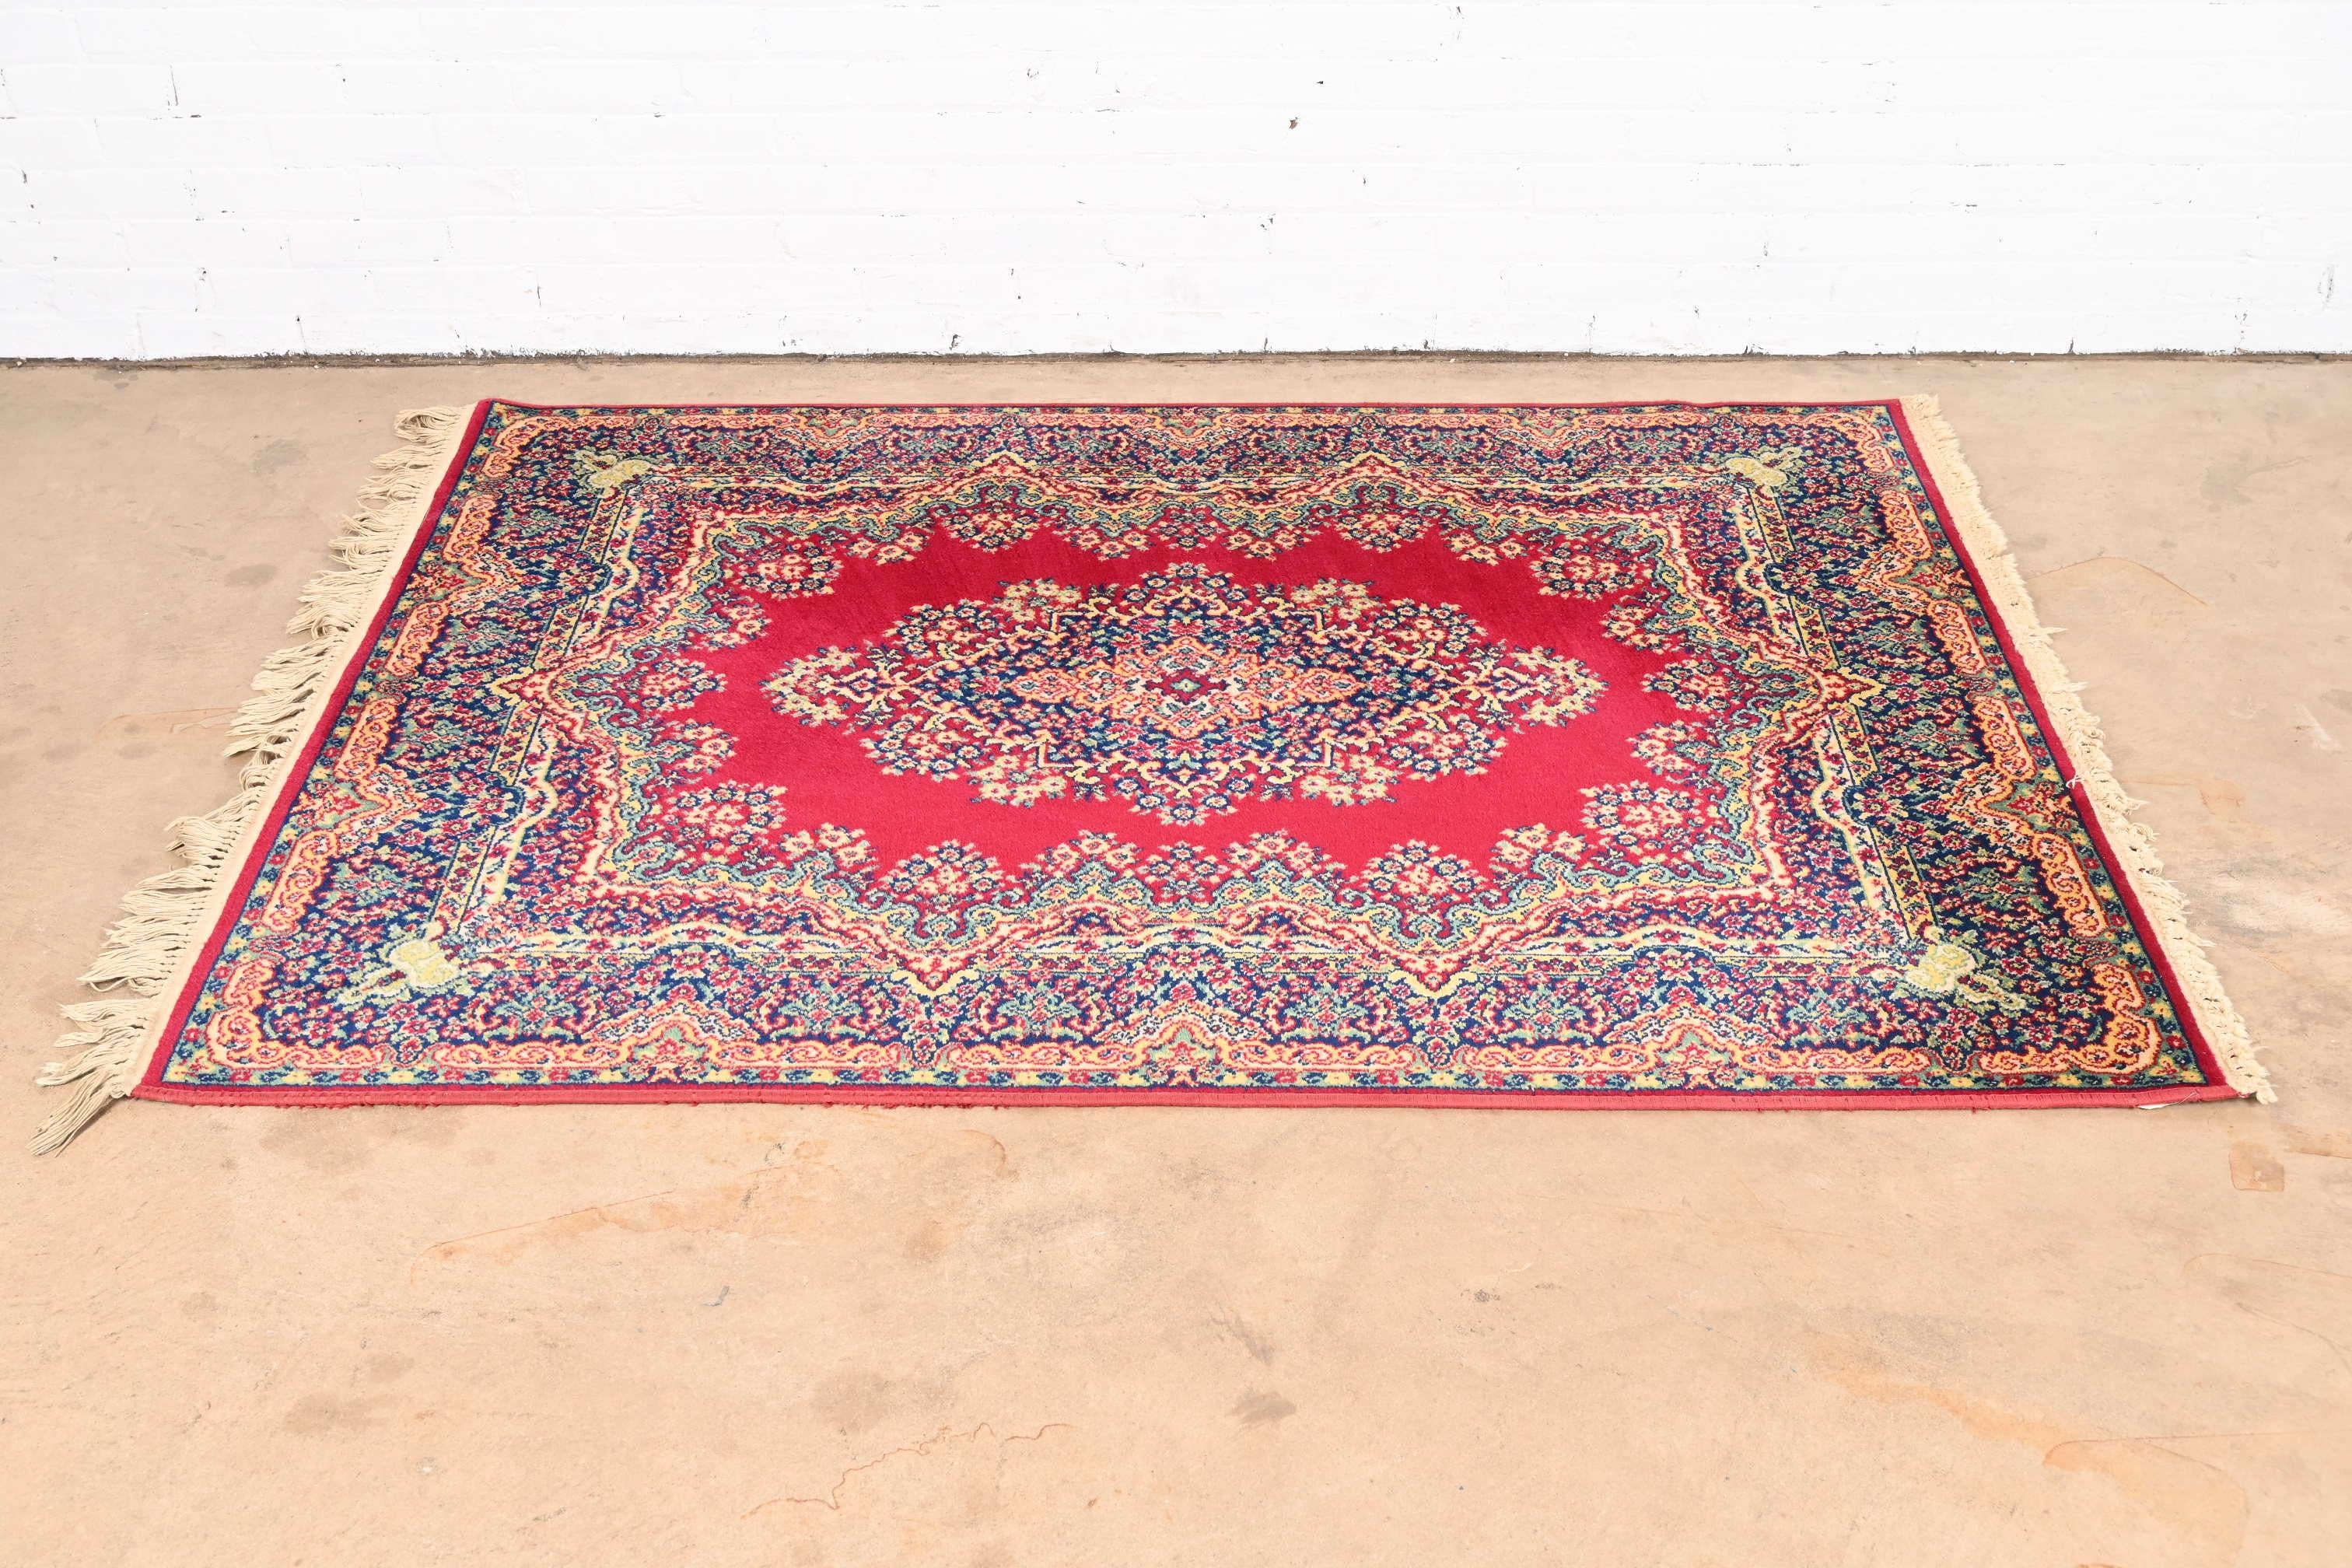 A gorgeous Royal Ashan Oriental style wool area rug

USA, mid-20th century

Beautiful floral design, with predominant colors in red, blue, and gold.

Measures: 55